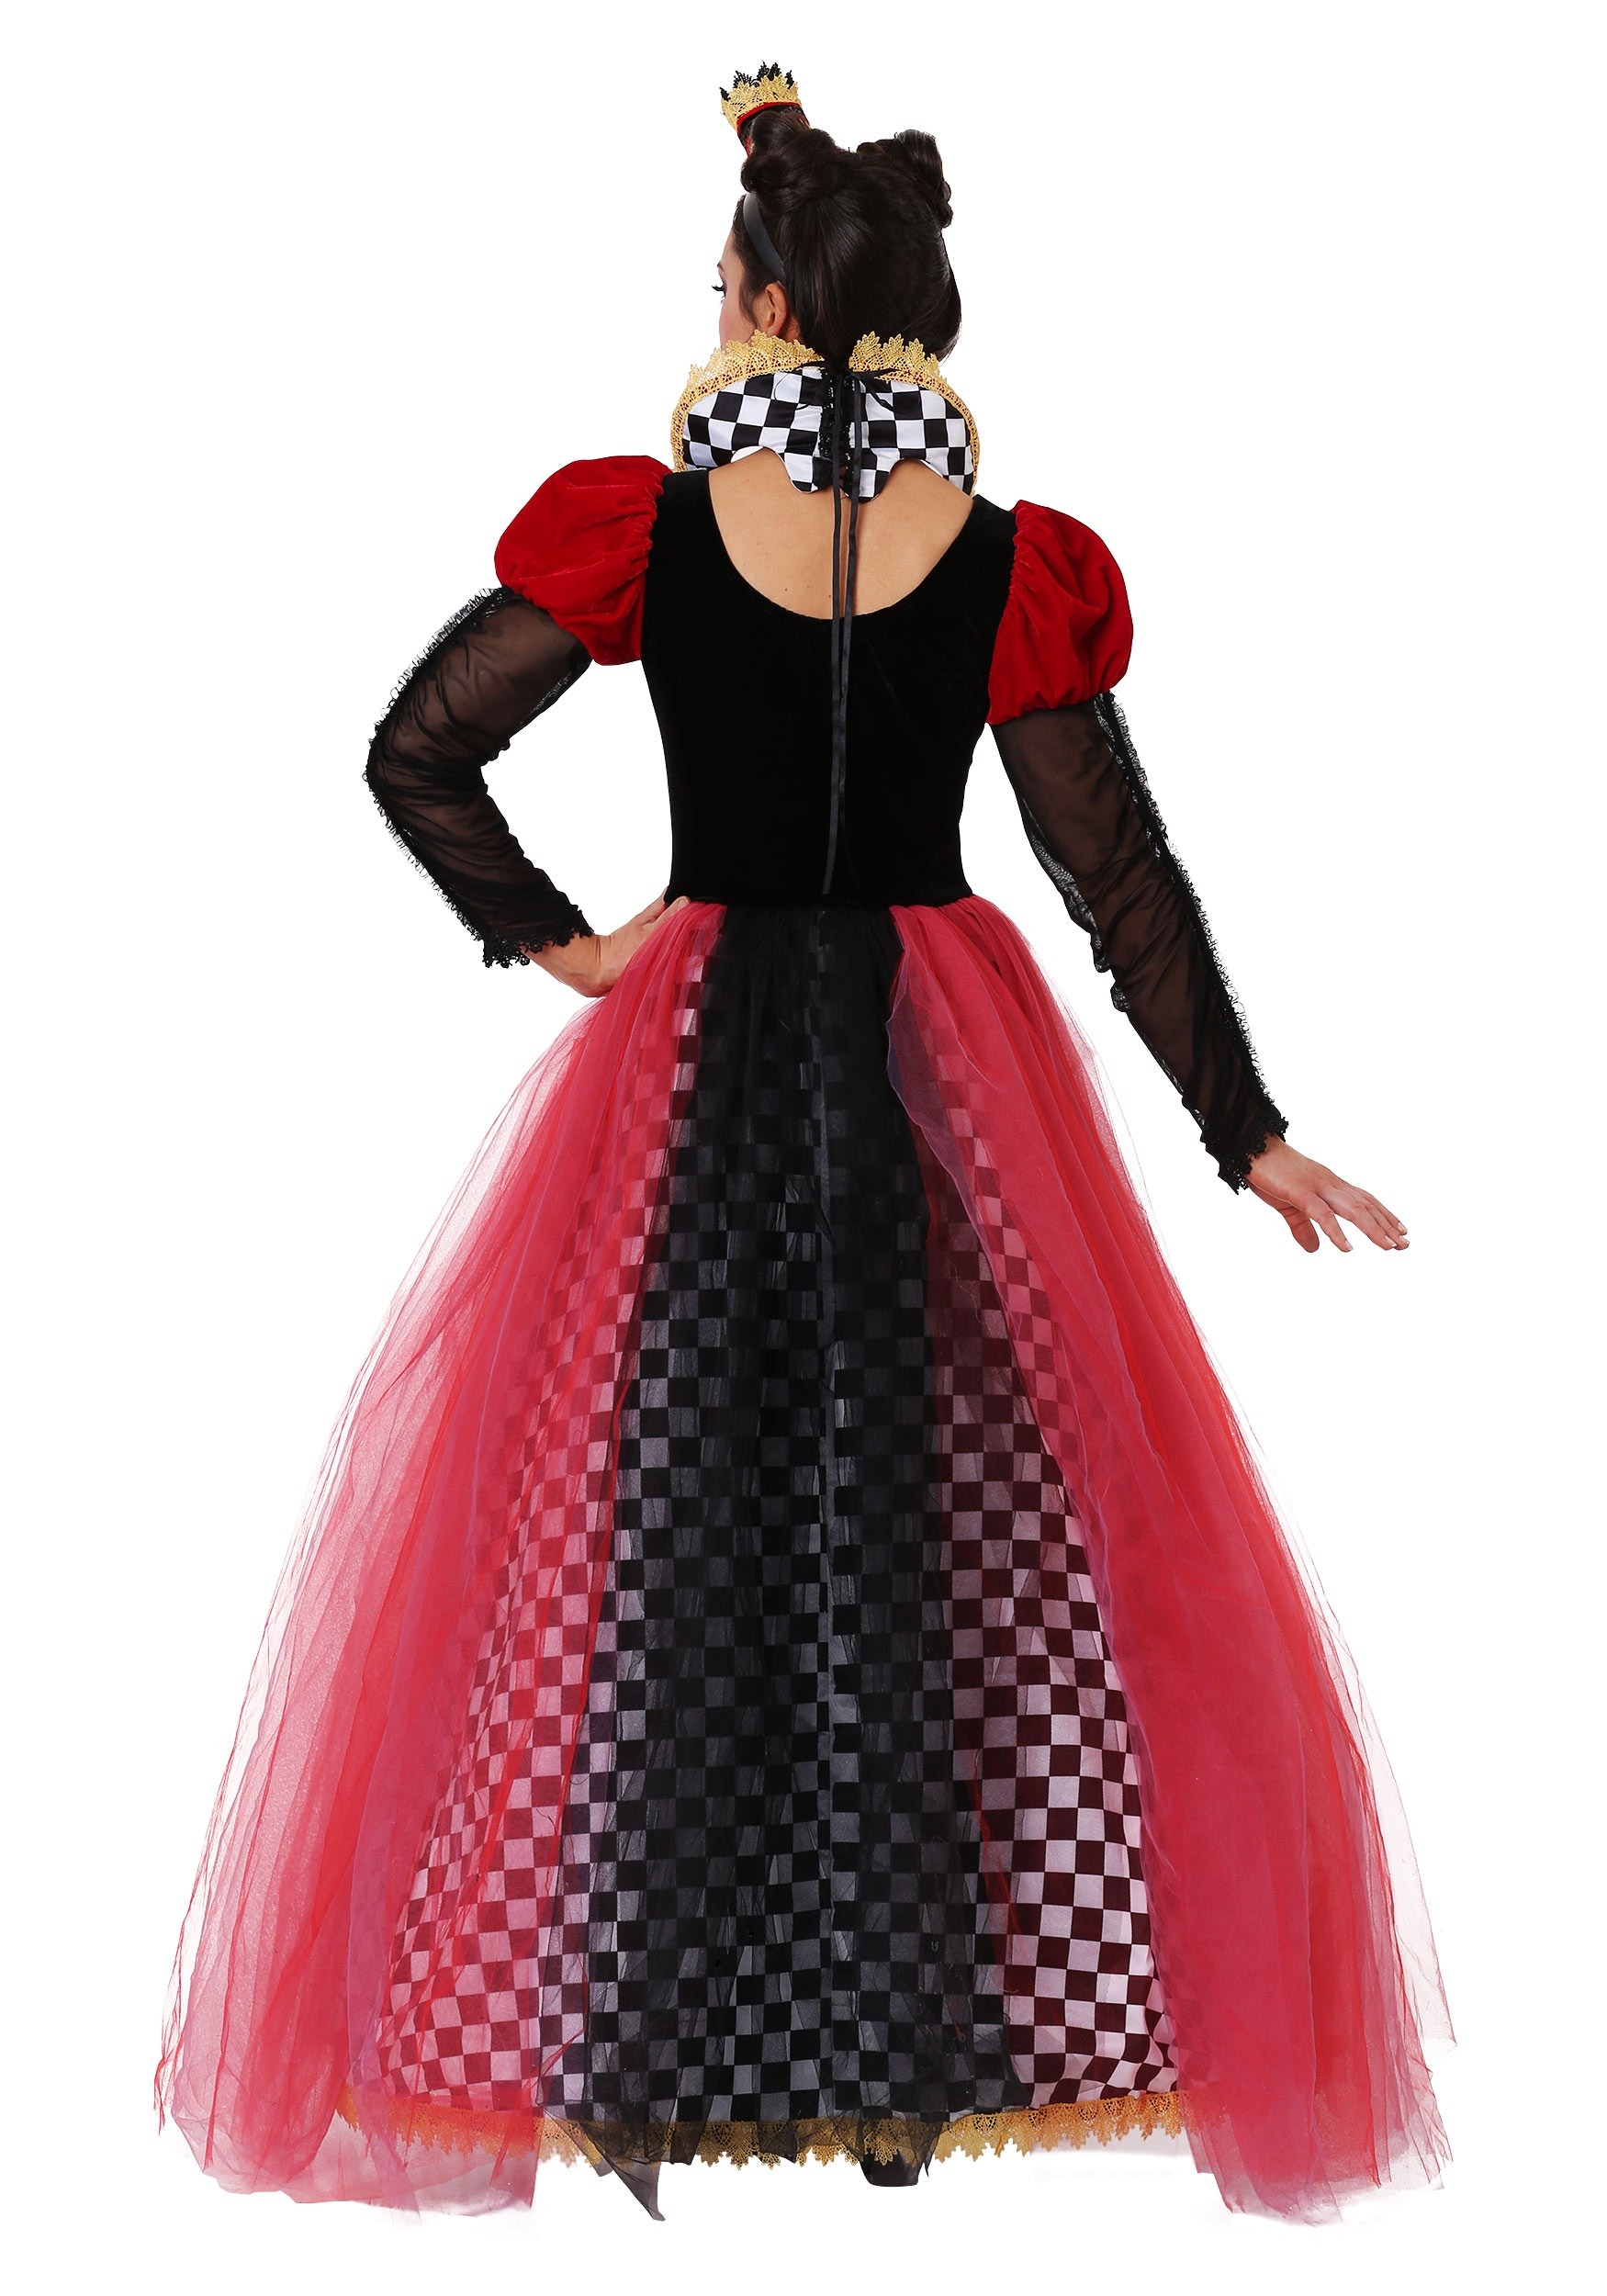 Plus Size Ravishing Queen of Hearts Costume for Plus Size Women 1X 2X